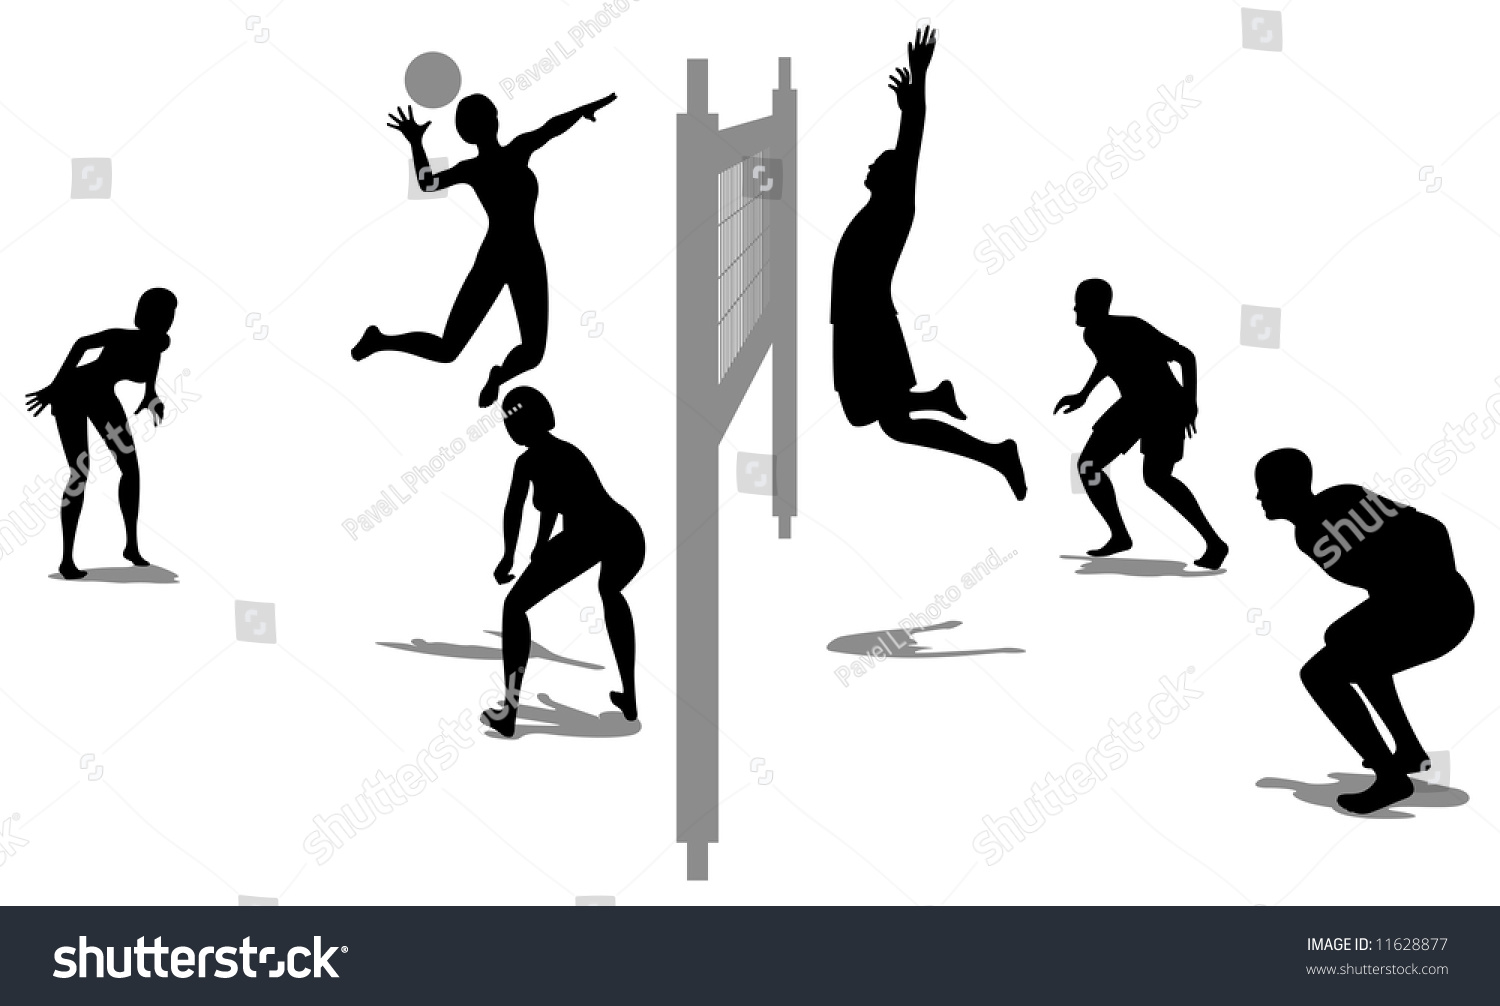 volleyball game clipart - photo #48